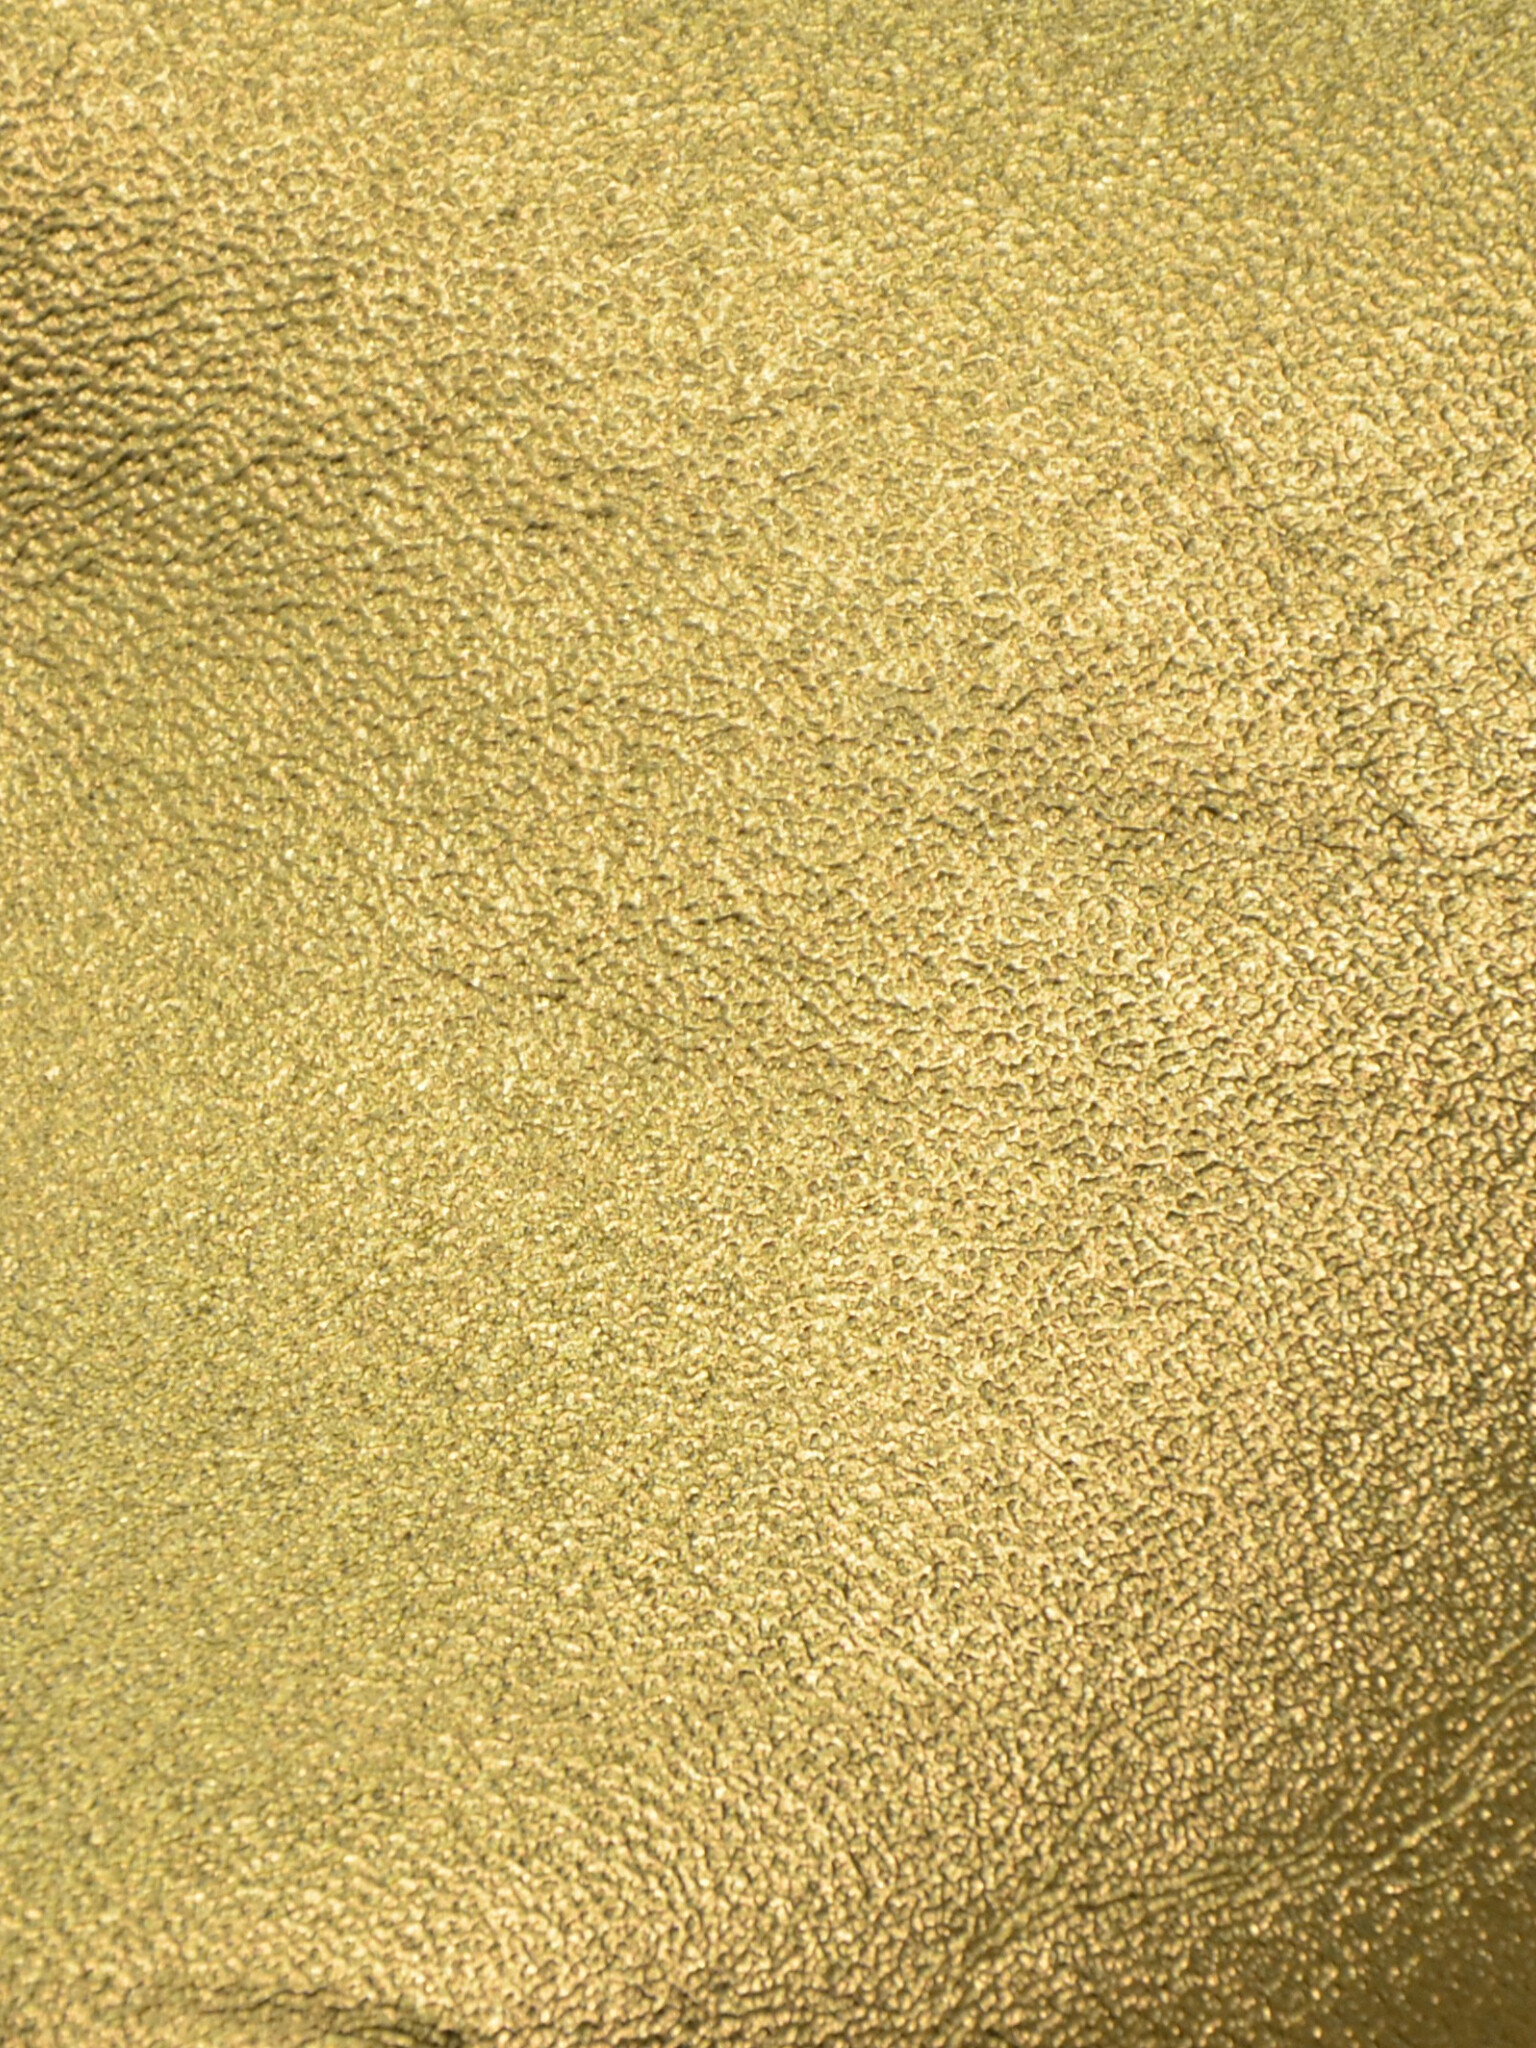 Gold Foil: Linear gradient, Metalized paper, Abstract design. 1540x2050 HD Background.